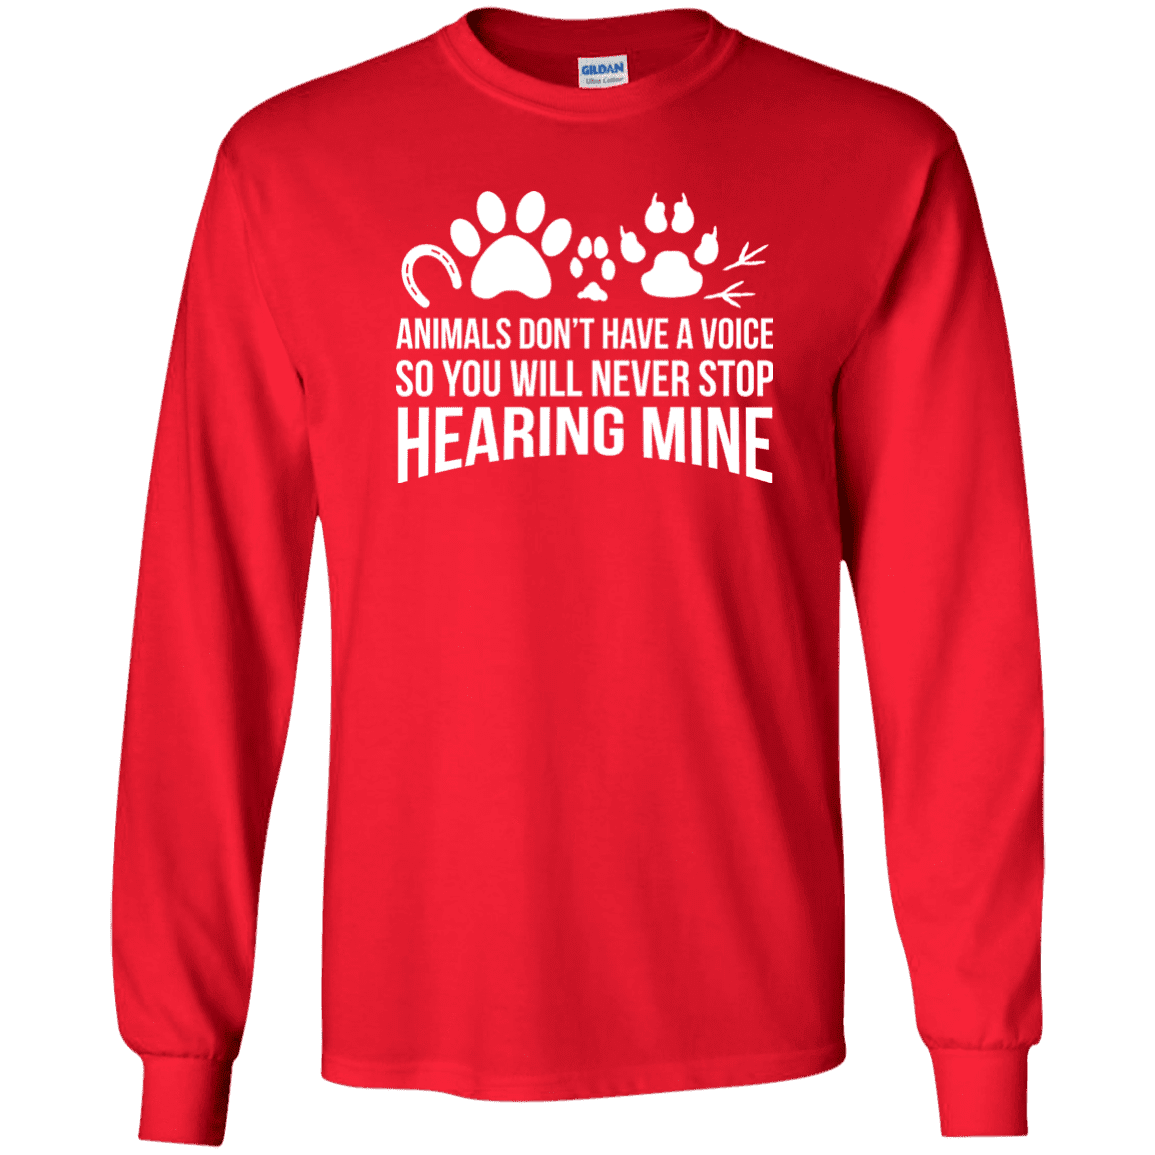 Animals Don't Have A Voice - Long Sleeve T Shirt.